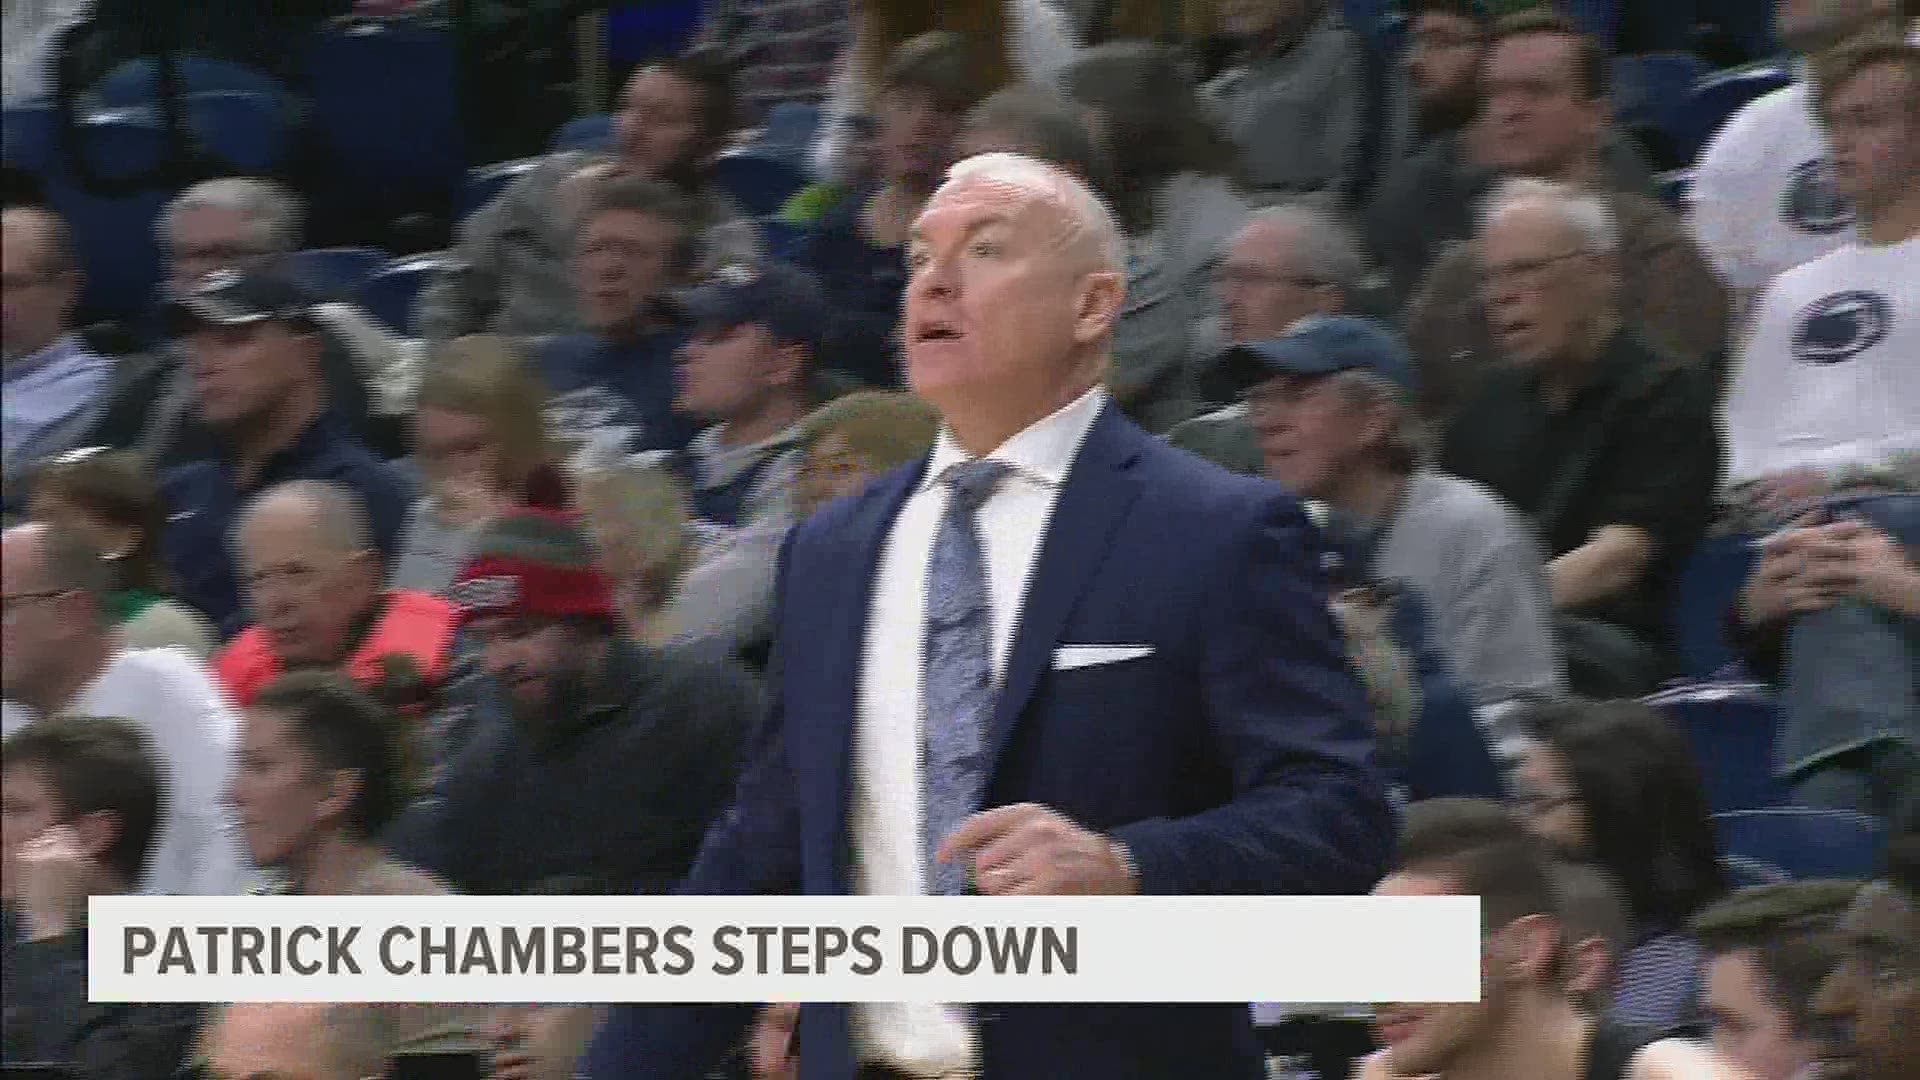 Nittany Lions men's head coach Pat Chambers resigned after an internal investigation of new allegations of inappropriate conduct